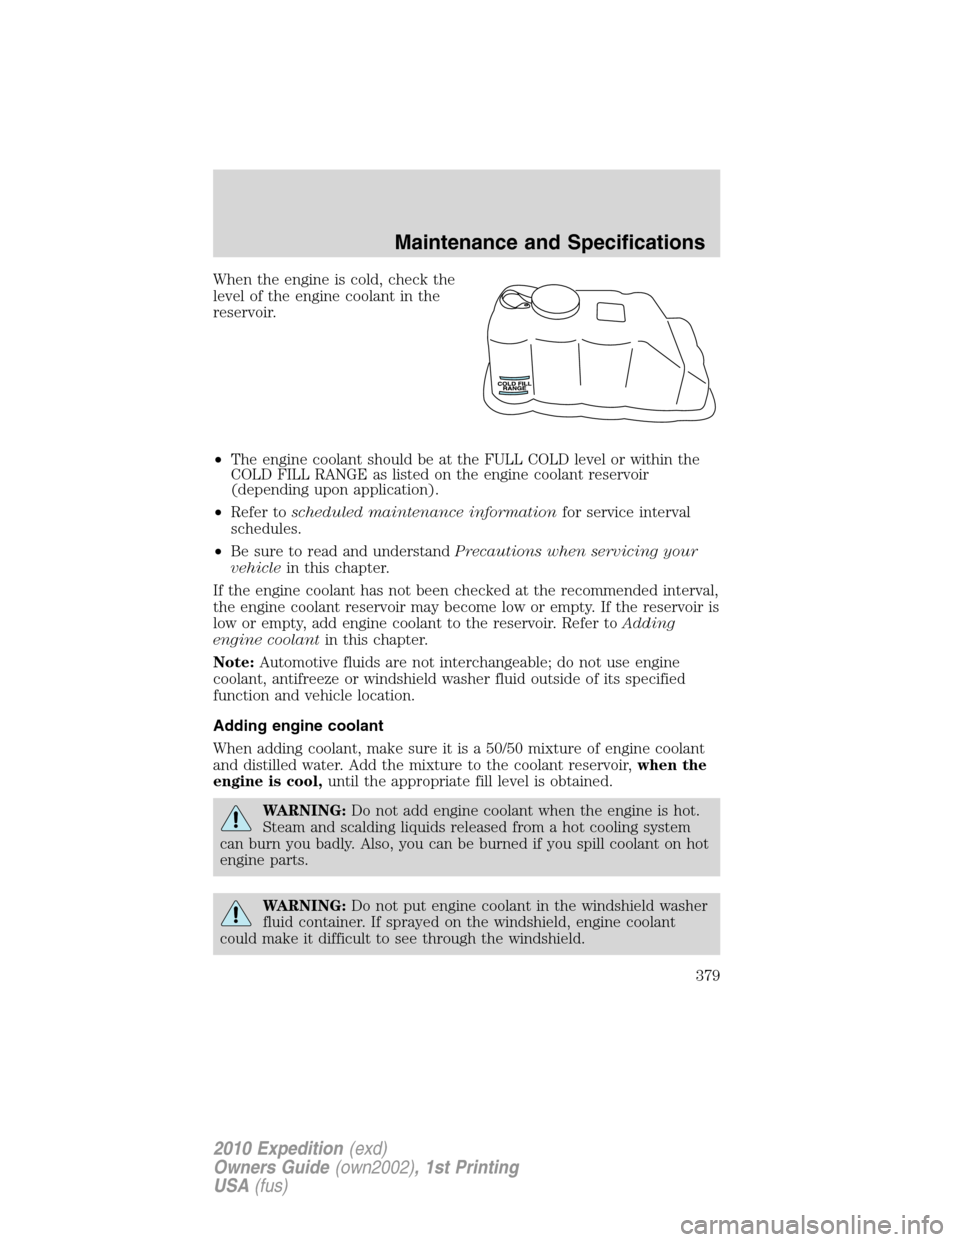 FORD EXPEDITION 2010 3.G Owners Manual When the engine is cold, check the
level of the engine coolant in the
reservoir.
•The engine coolant should be at the FULL COLD level or within the
COLD FILL RANGE as listed on the engine coolant re